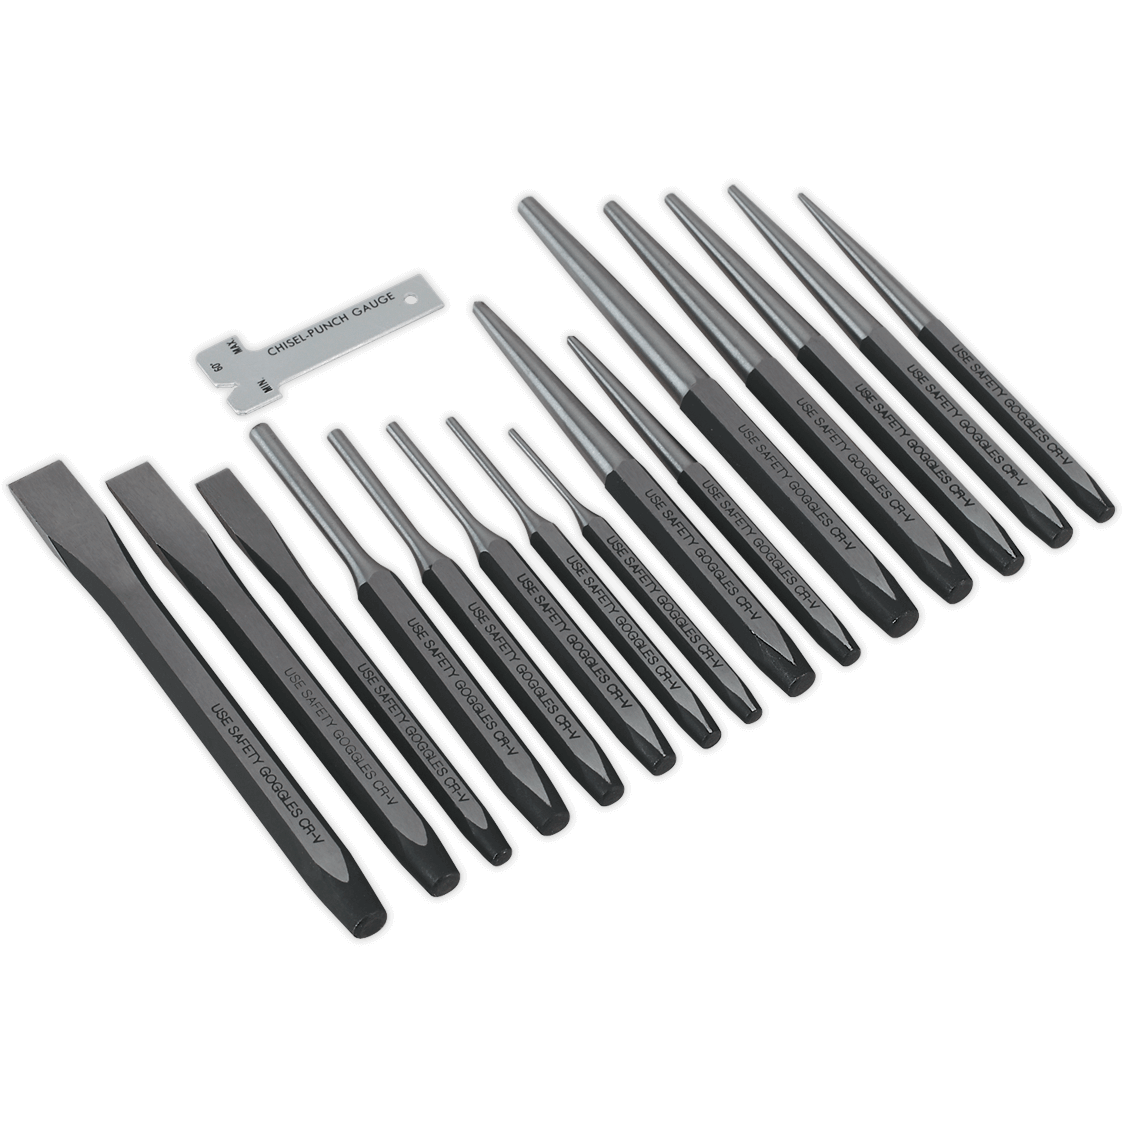 Sealey 16 Piece Punch and Chisel Set